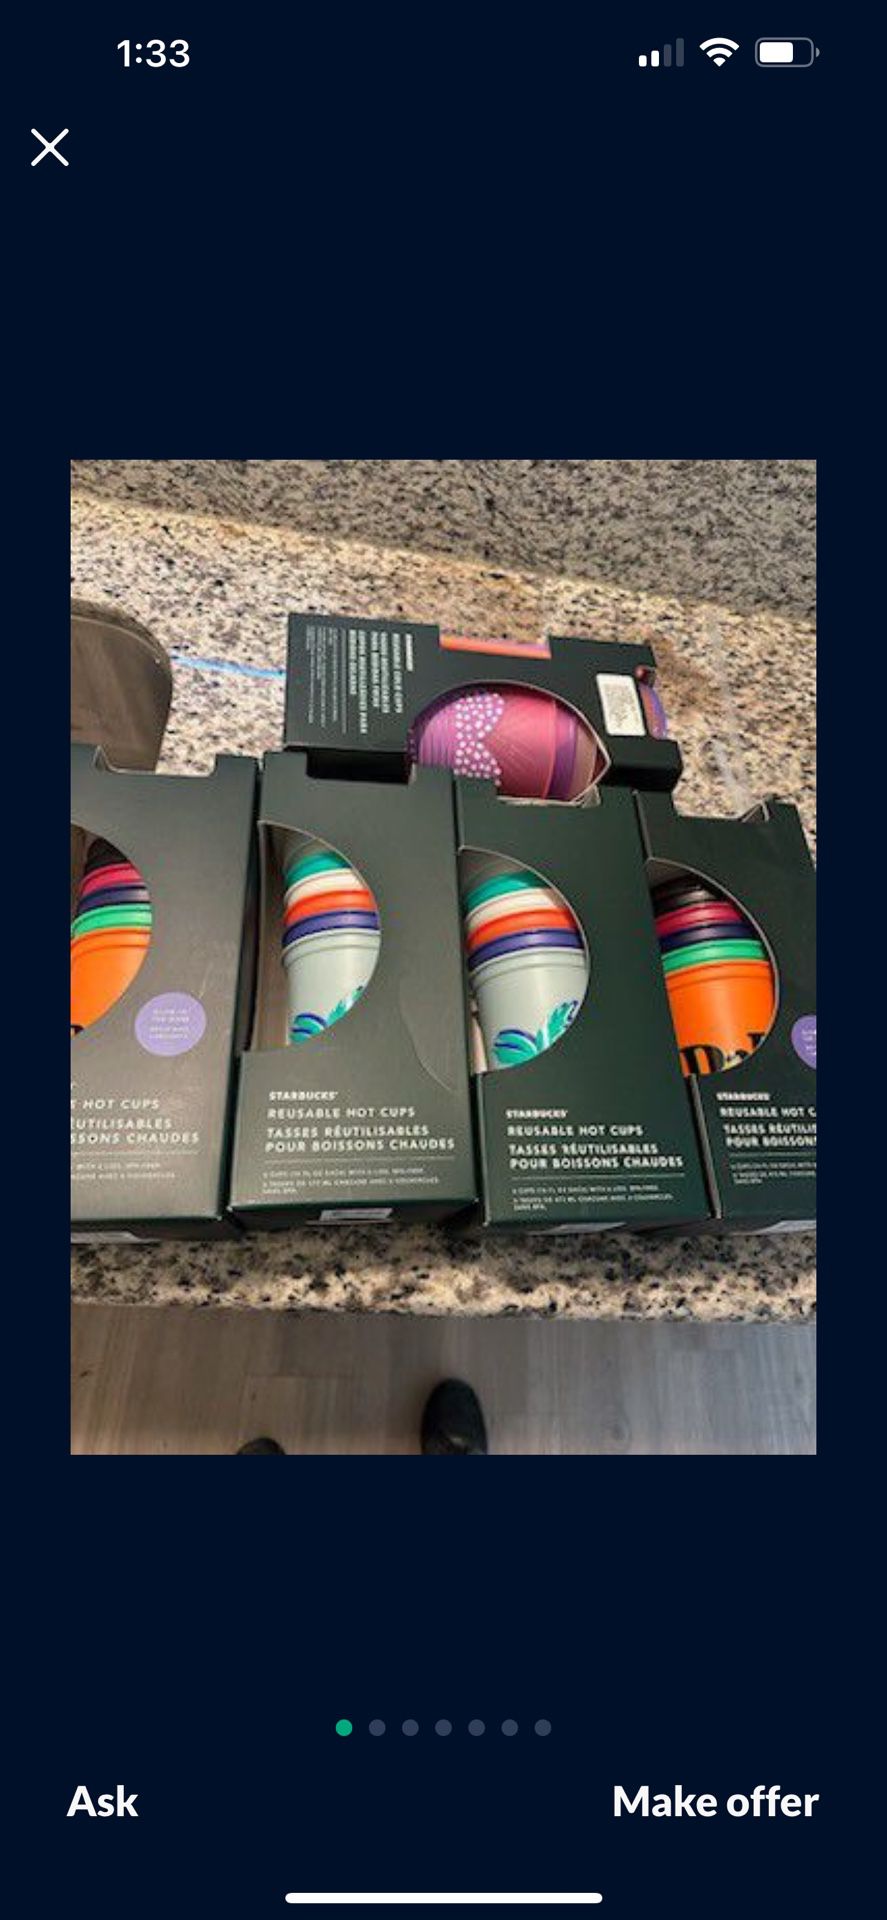 Snackeez cups. Take your drink and snack together for Sale in Long Beach,  CA - OfferUp